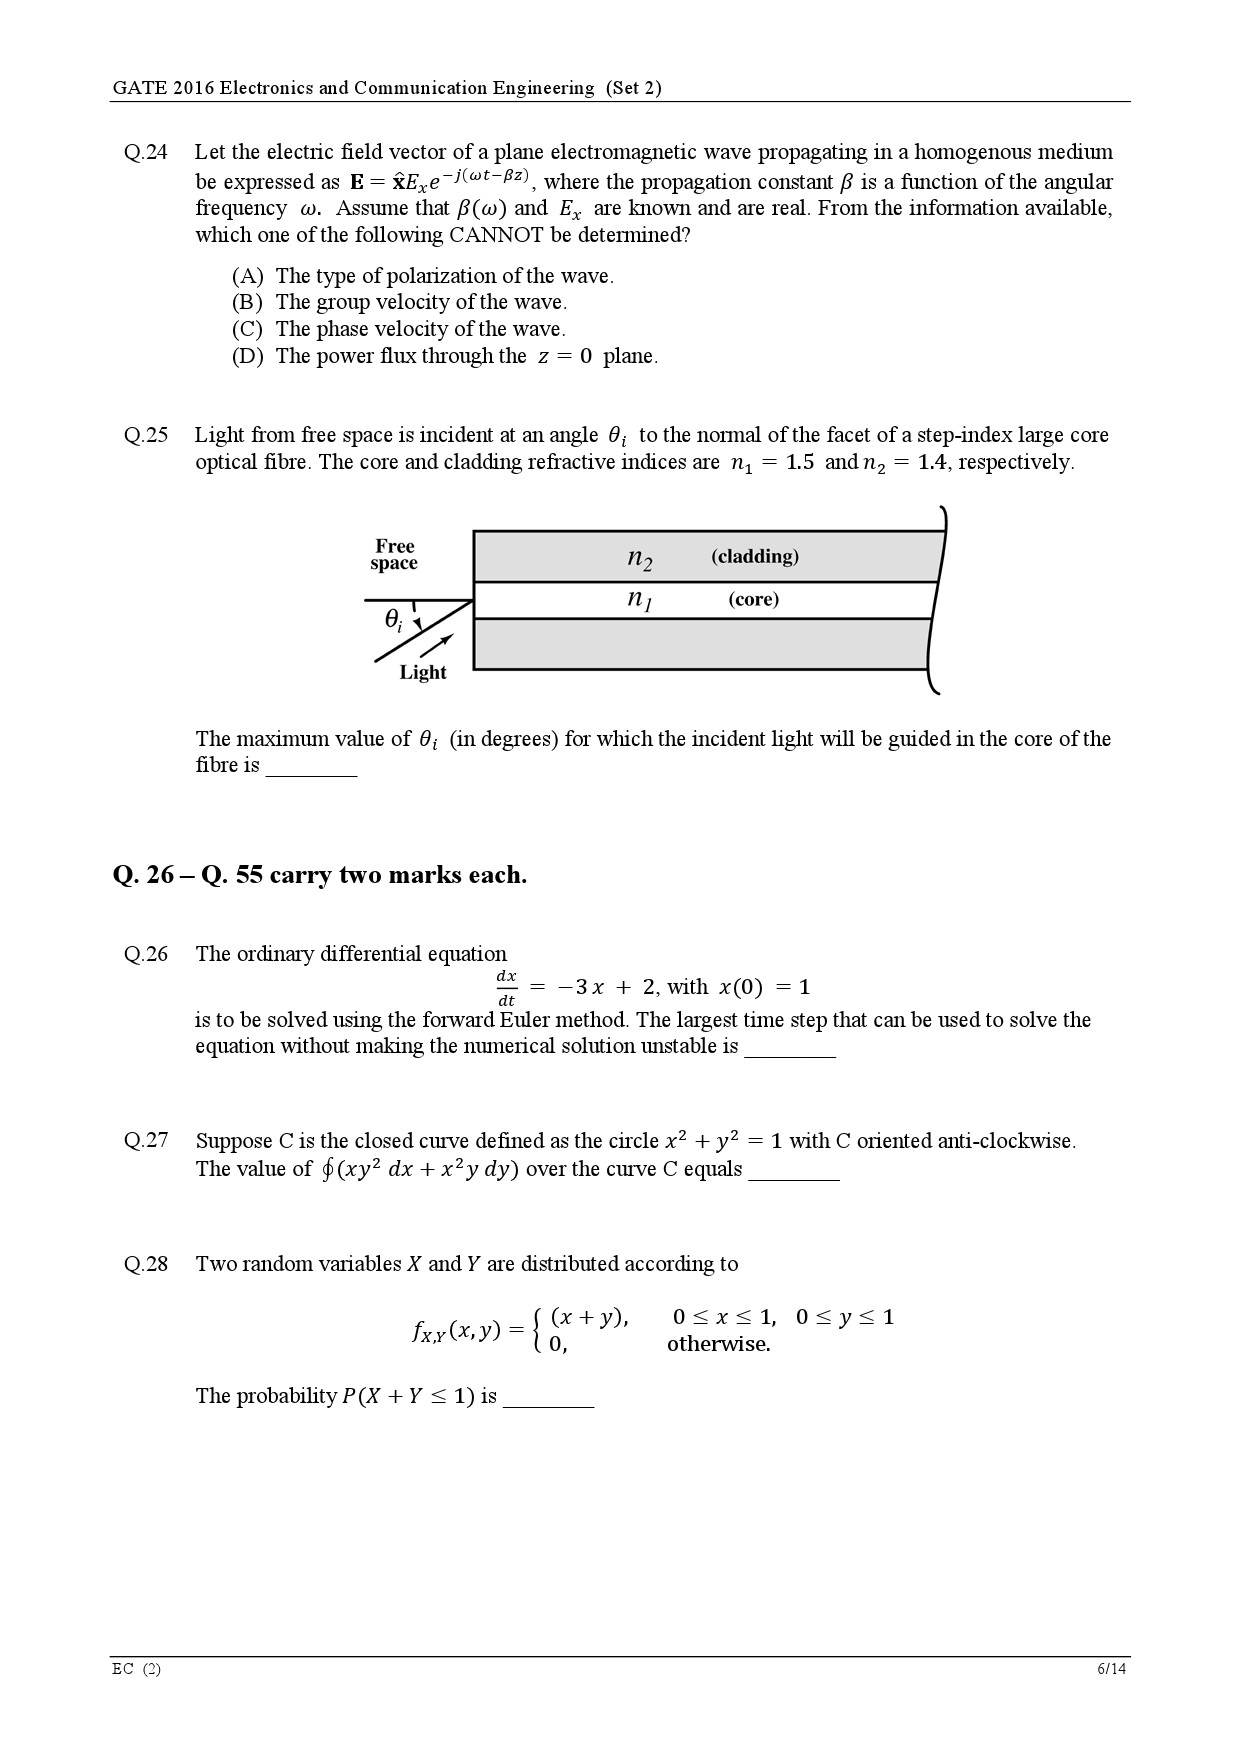 GATE Exam Question Paper 2016 Electronics and Communication Engineering Set 2 9